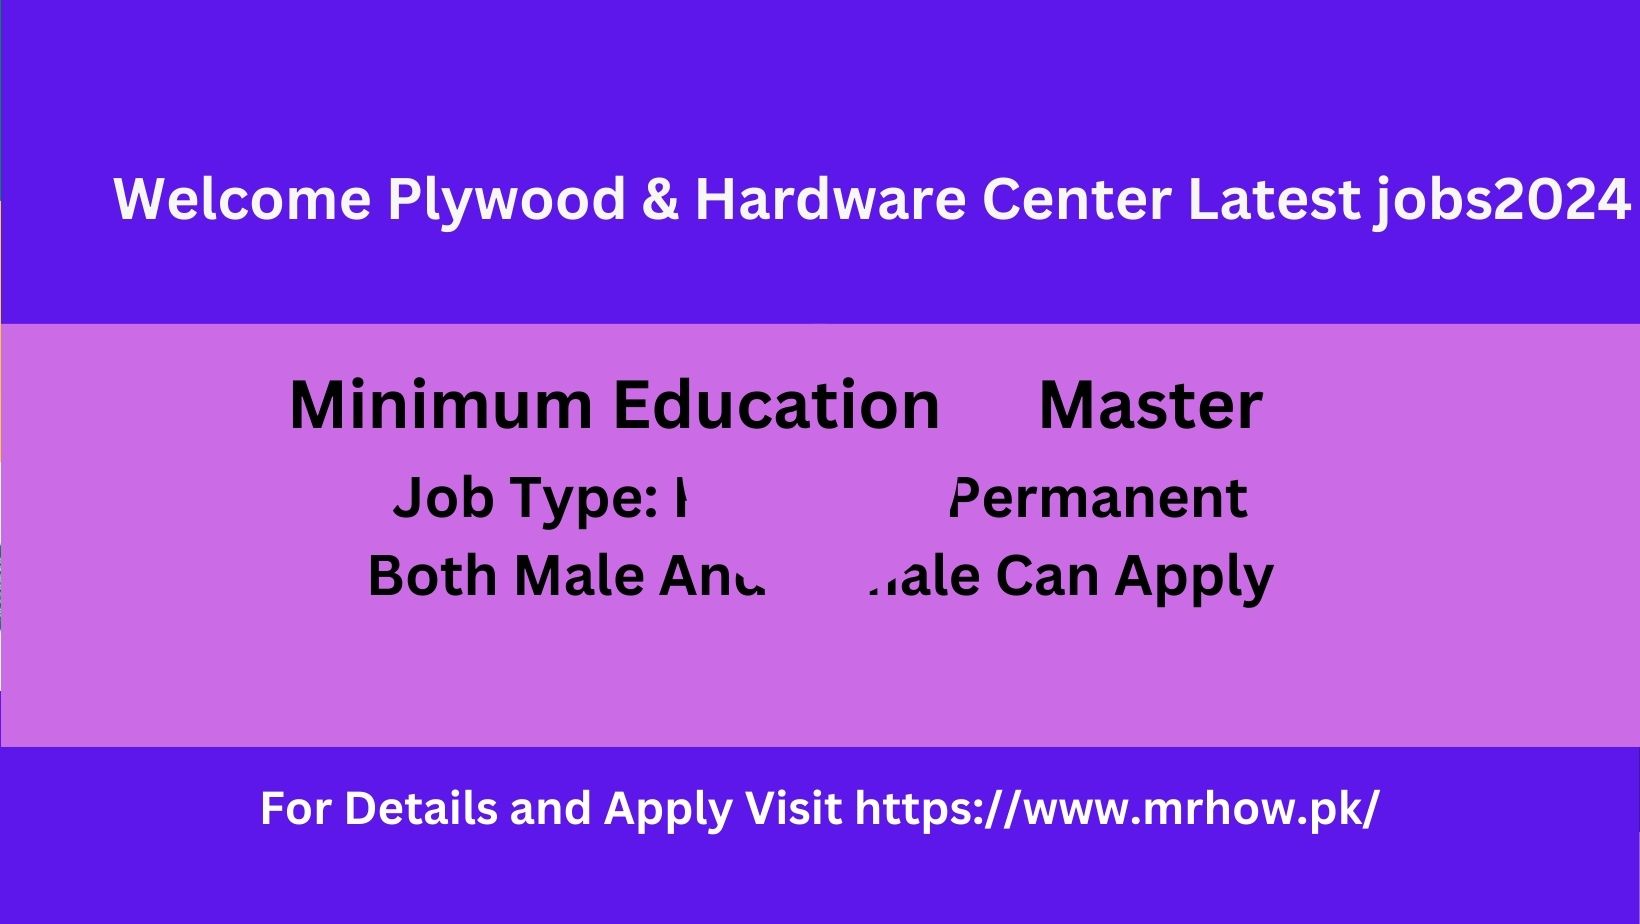 Welcome Plywood & Hardware Center